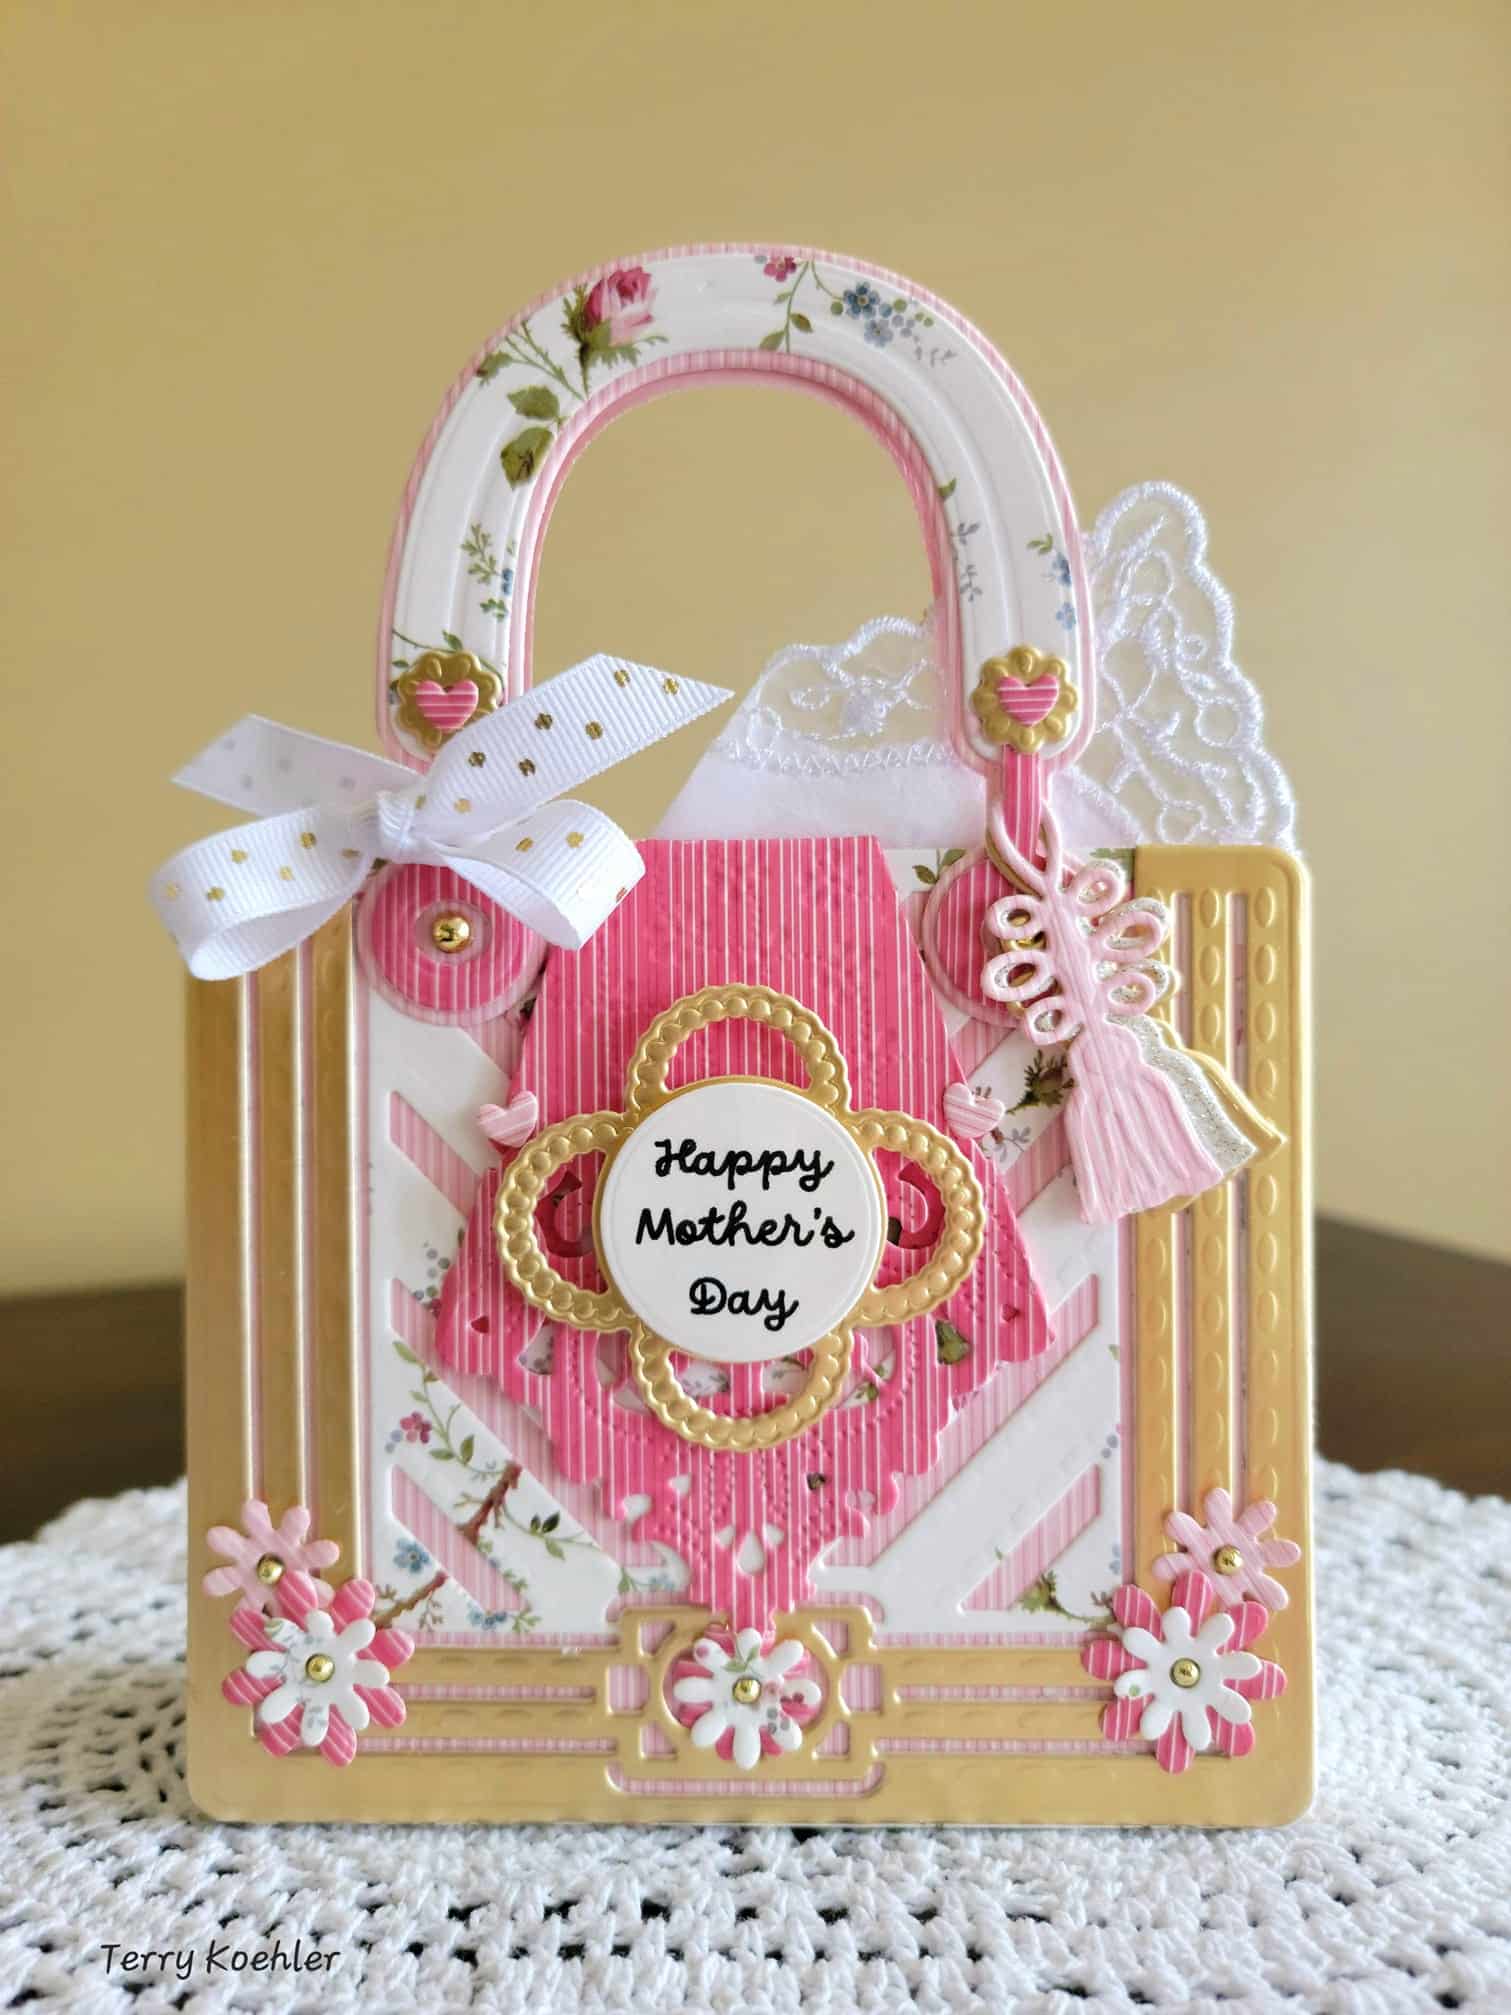 a pink and white bag with a happy mother's day tag on it.